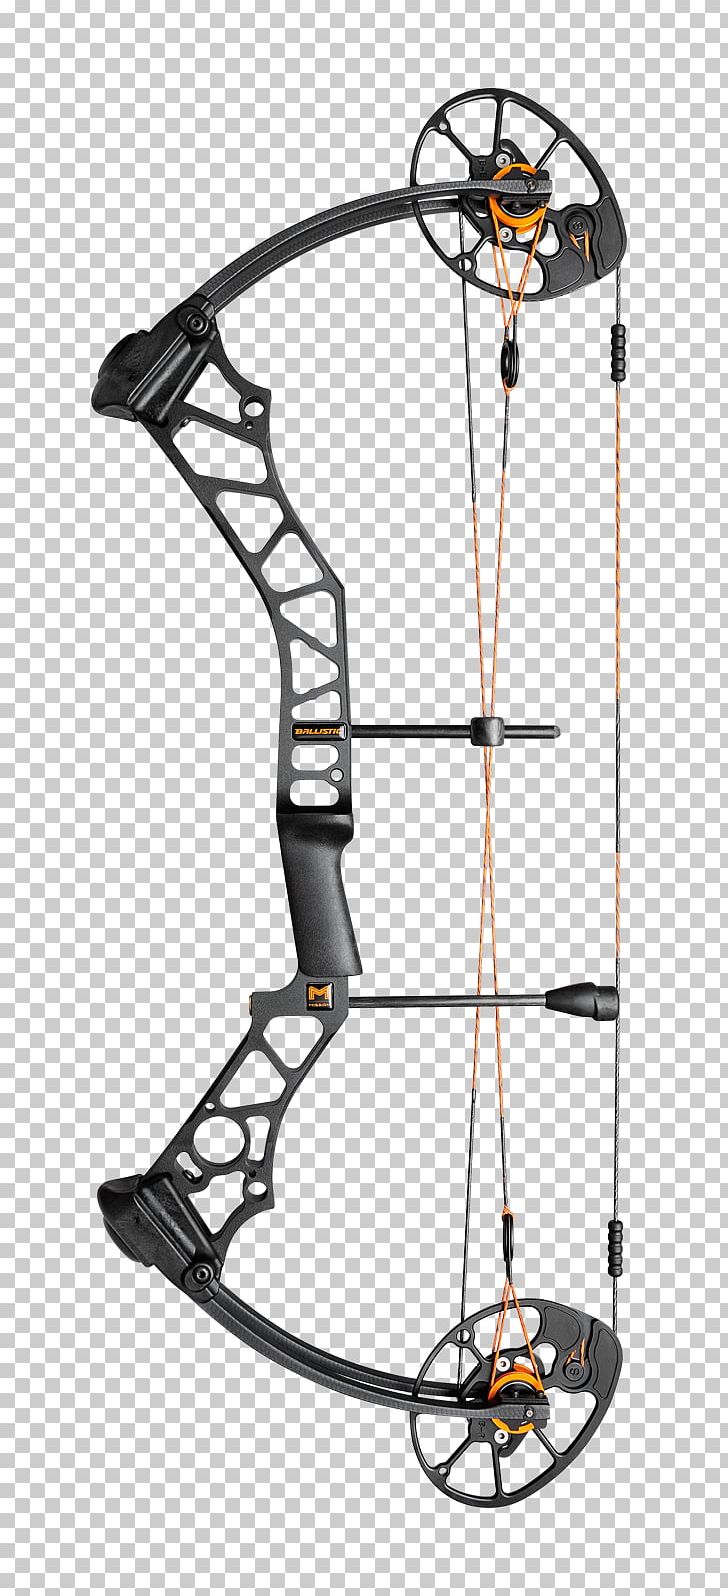 Compound Bows Hunting Ballistics Bow And Arrow Crossbow PNG, Clipart, Archery, Ballistic, Ballistics, Bicycle Accessory, Borkholder Archery Free PNG Download